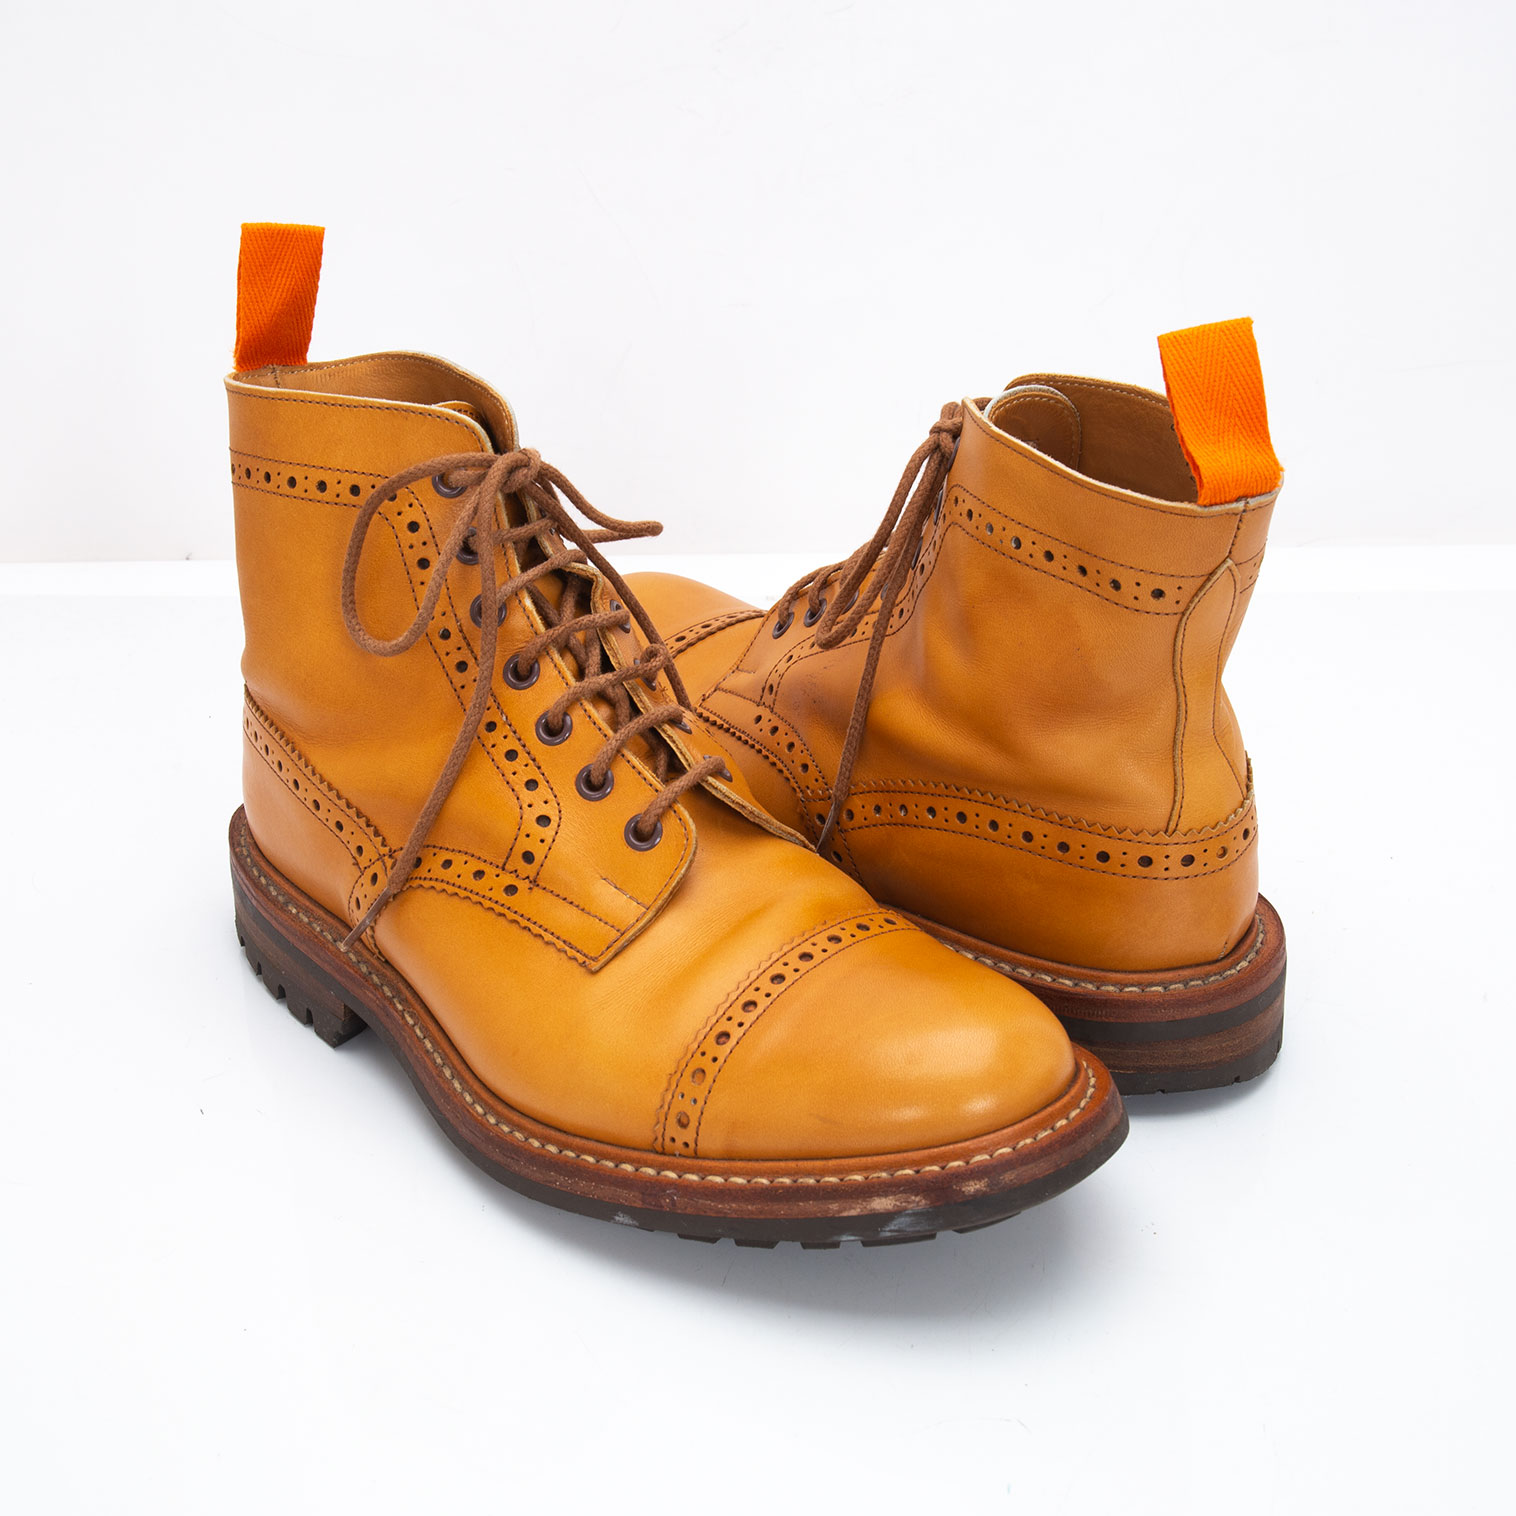 JUNYA WATANABE MAN x Tricker's Leather country Boots